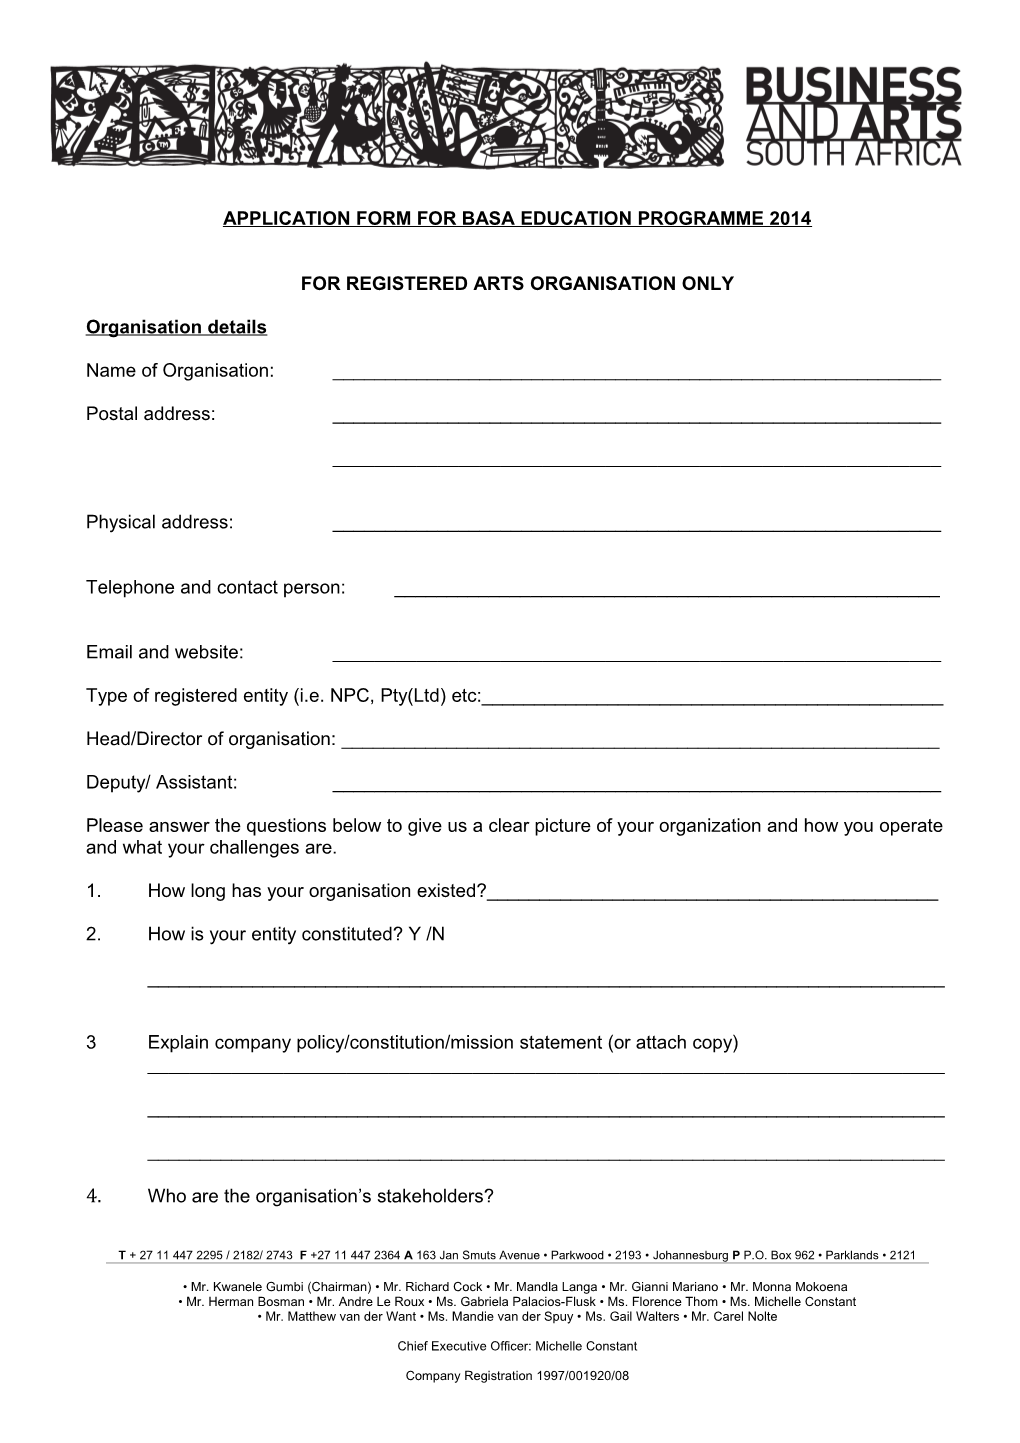 Application Form for Basa Education Programme 2014